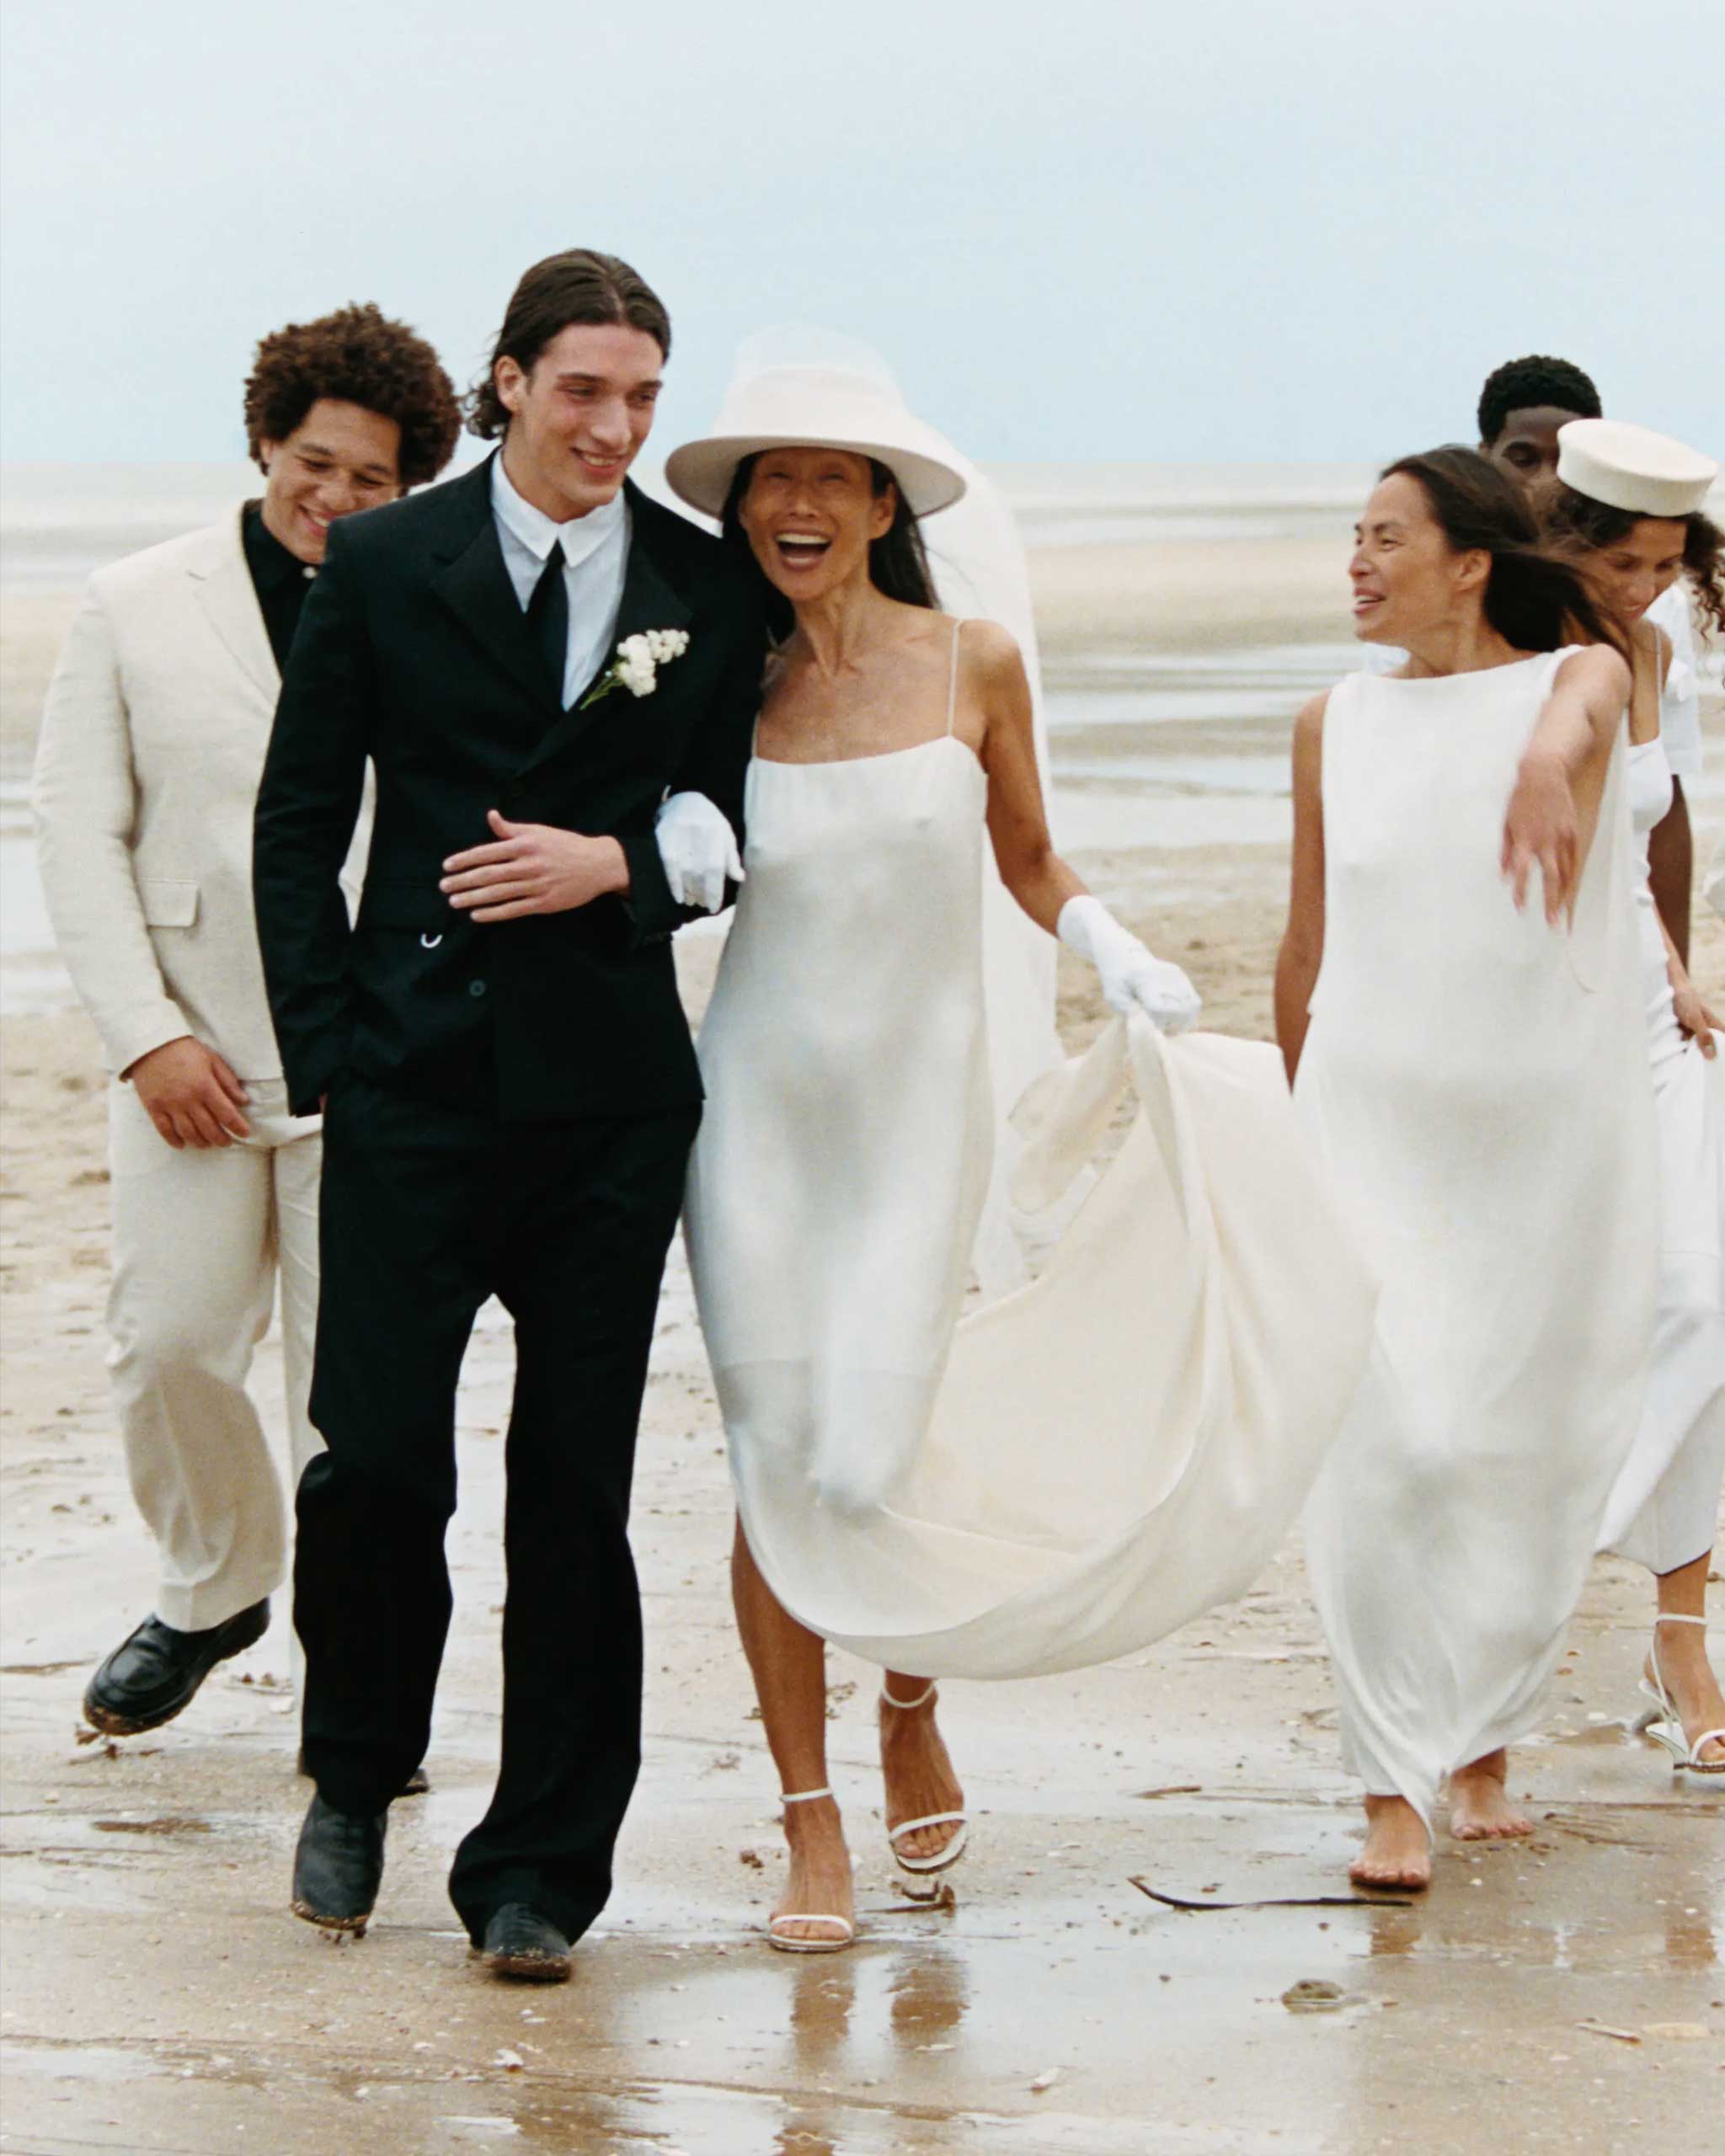 Le Mariage: Inside the Jacquemus Wedding Collection